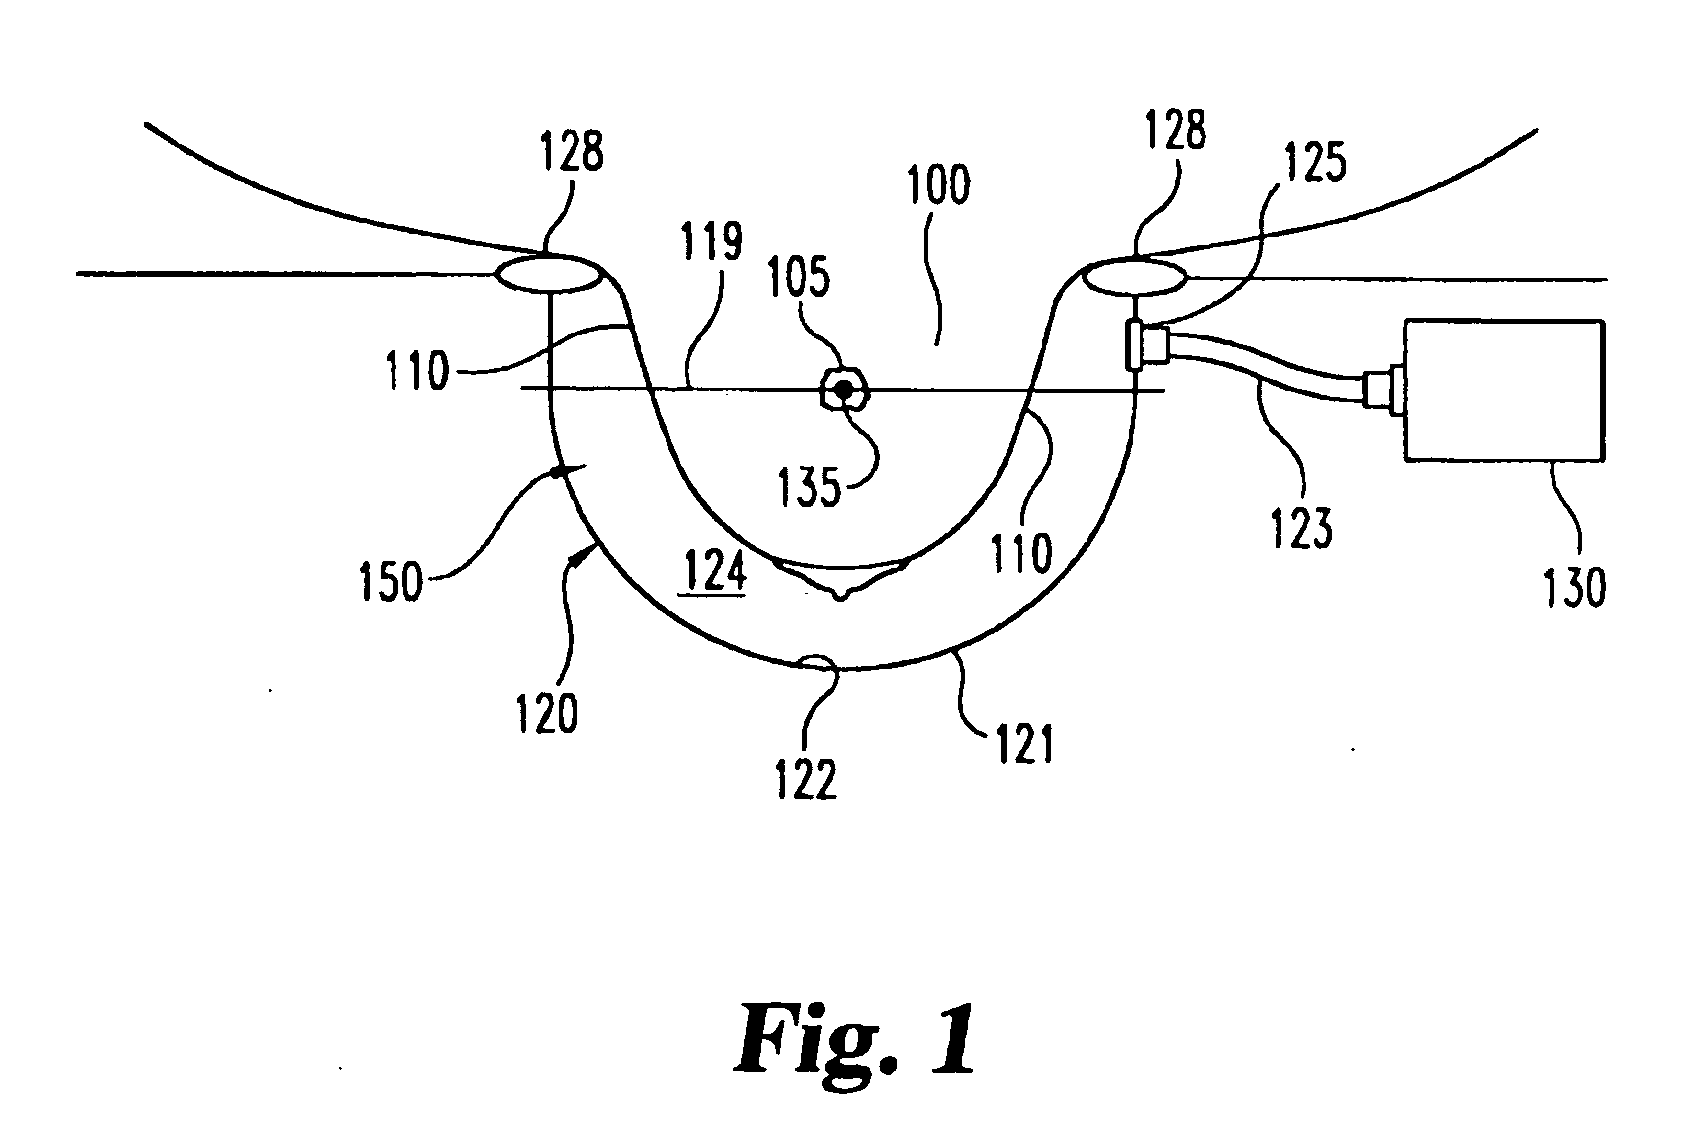 Apparatus and method for the treatment of breast cancer with particle beams